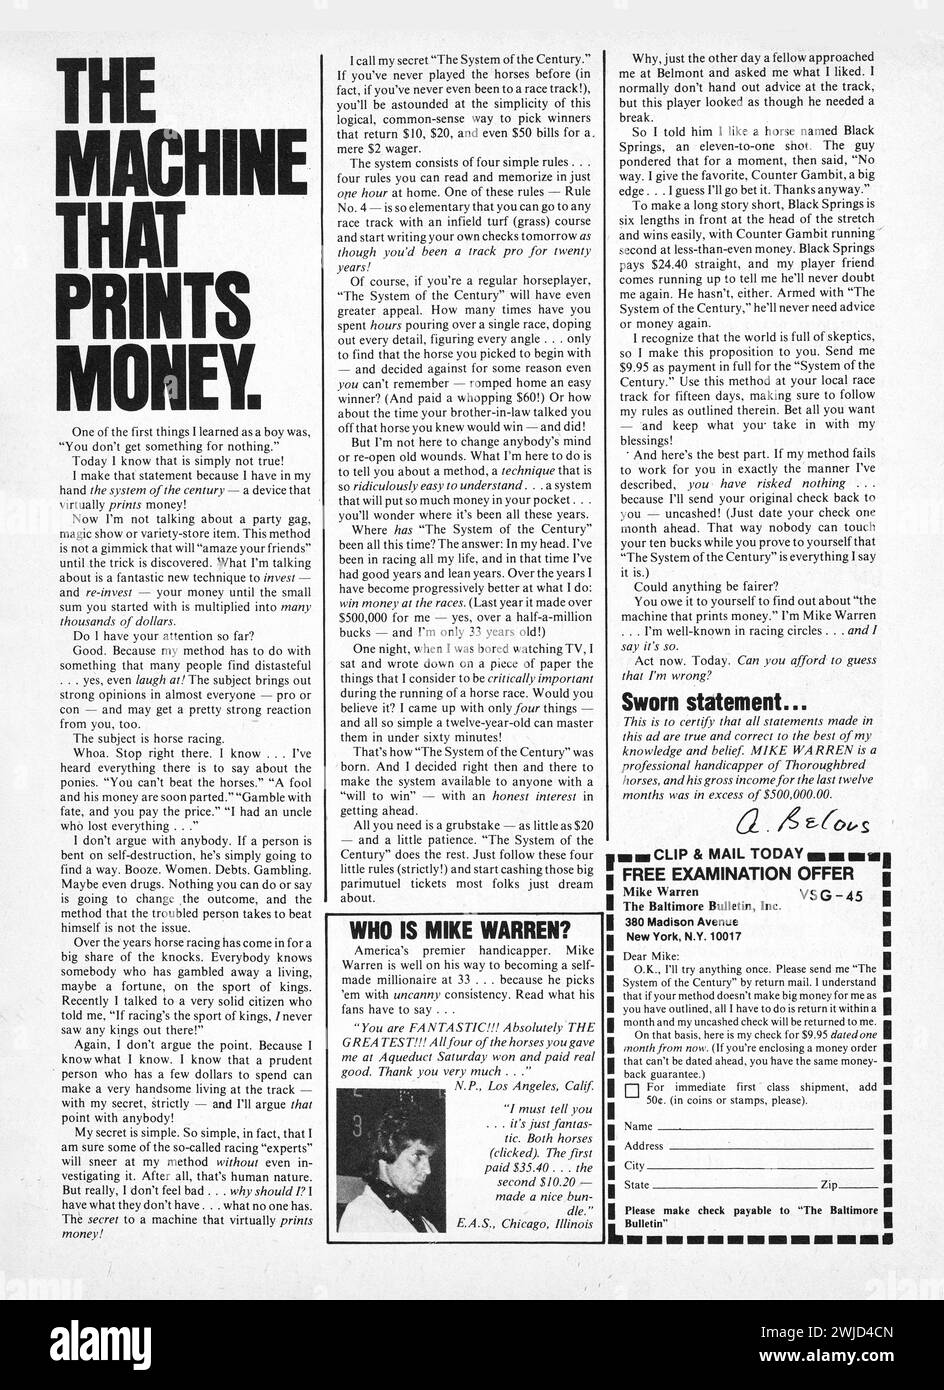 The Machine That Prints Money.  The System of the Century. An advertisement for a book about betting on the horses that will make anyone rich very quickly. Written by Mike Warren and with a money back guarantee. What could possibly go wrong??? From a late 1970s sports magazine. Stock Photo